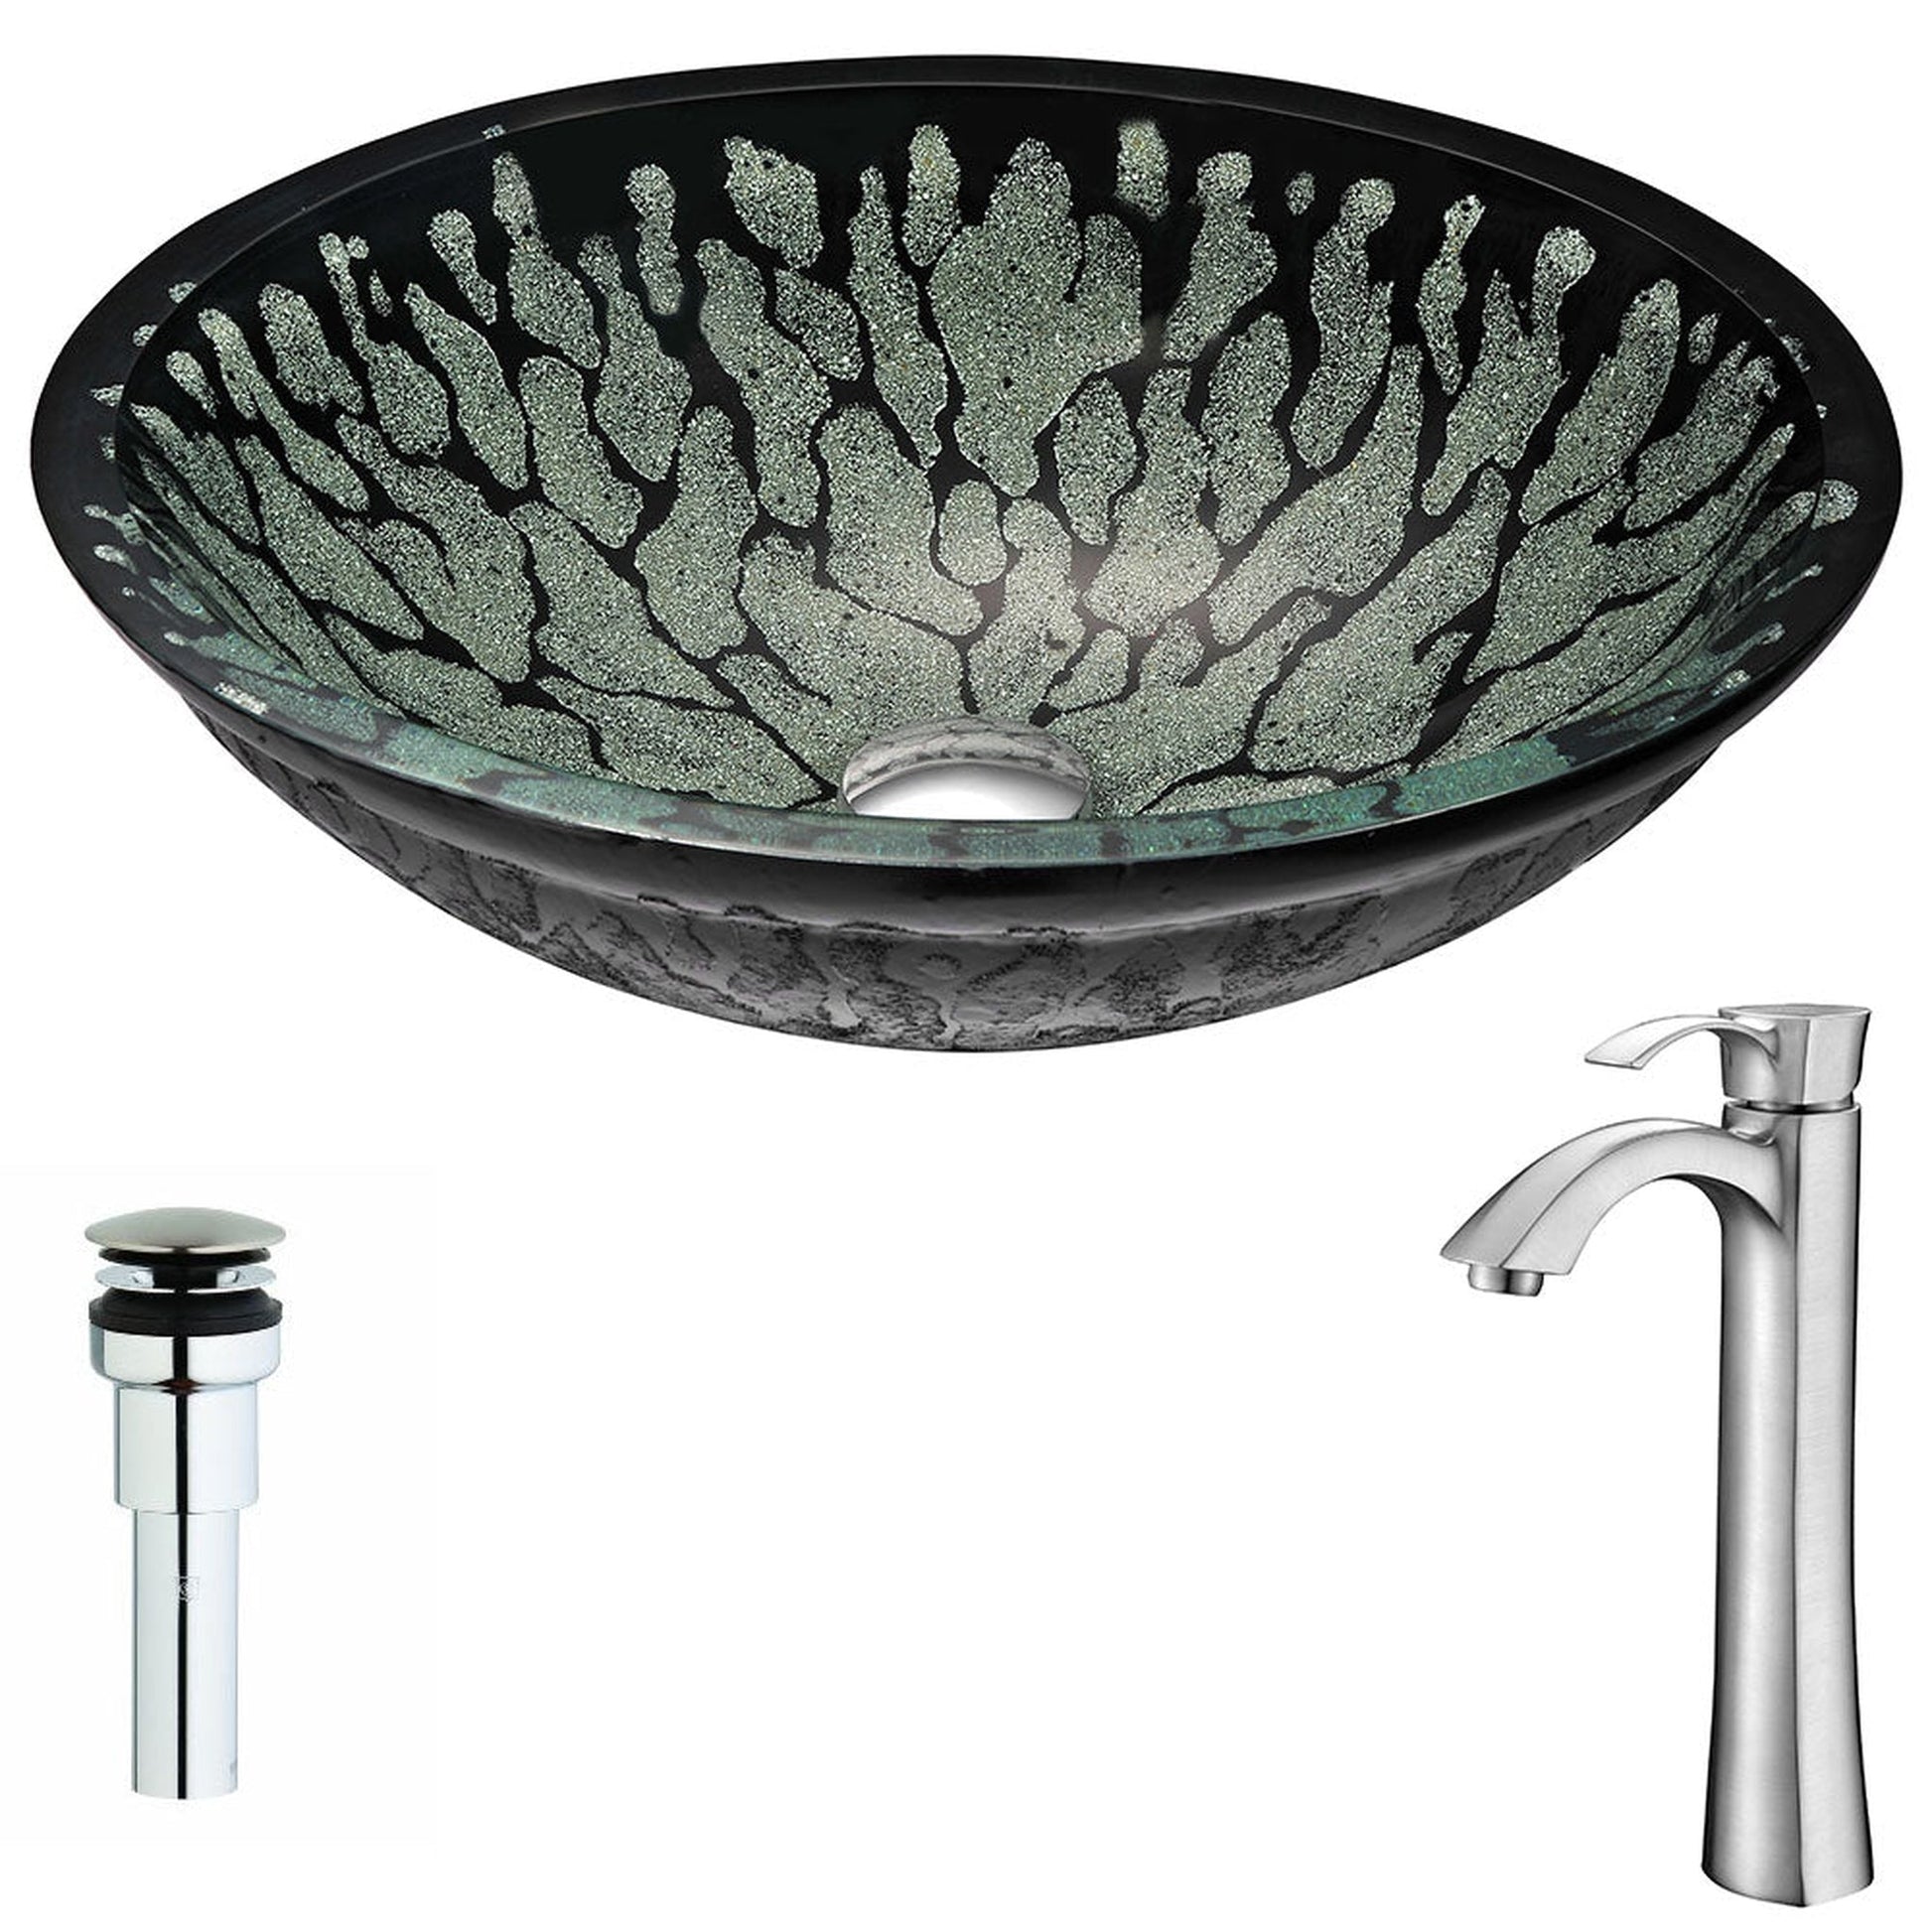 ANZZI Bravo Series 19" x 15" Oval Shape Lustrous Black Deco-Glass Vessel Sink With Chrome Pop-Up Drain and Brushed Nickel Harmony Faucet